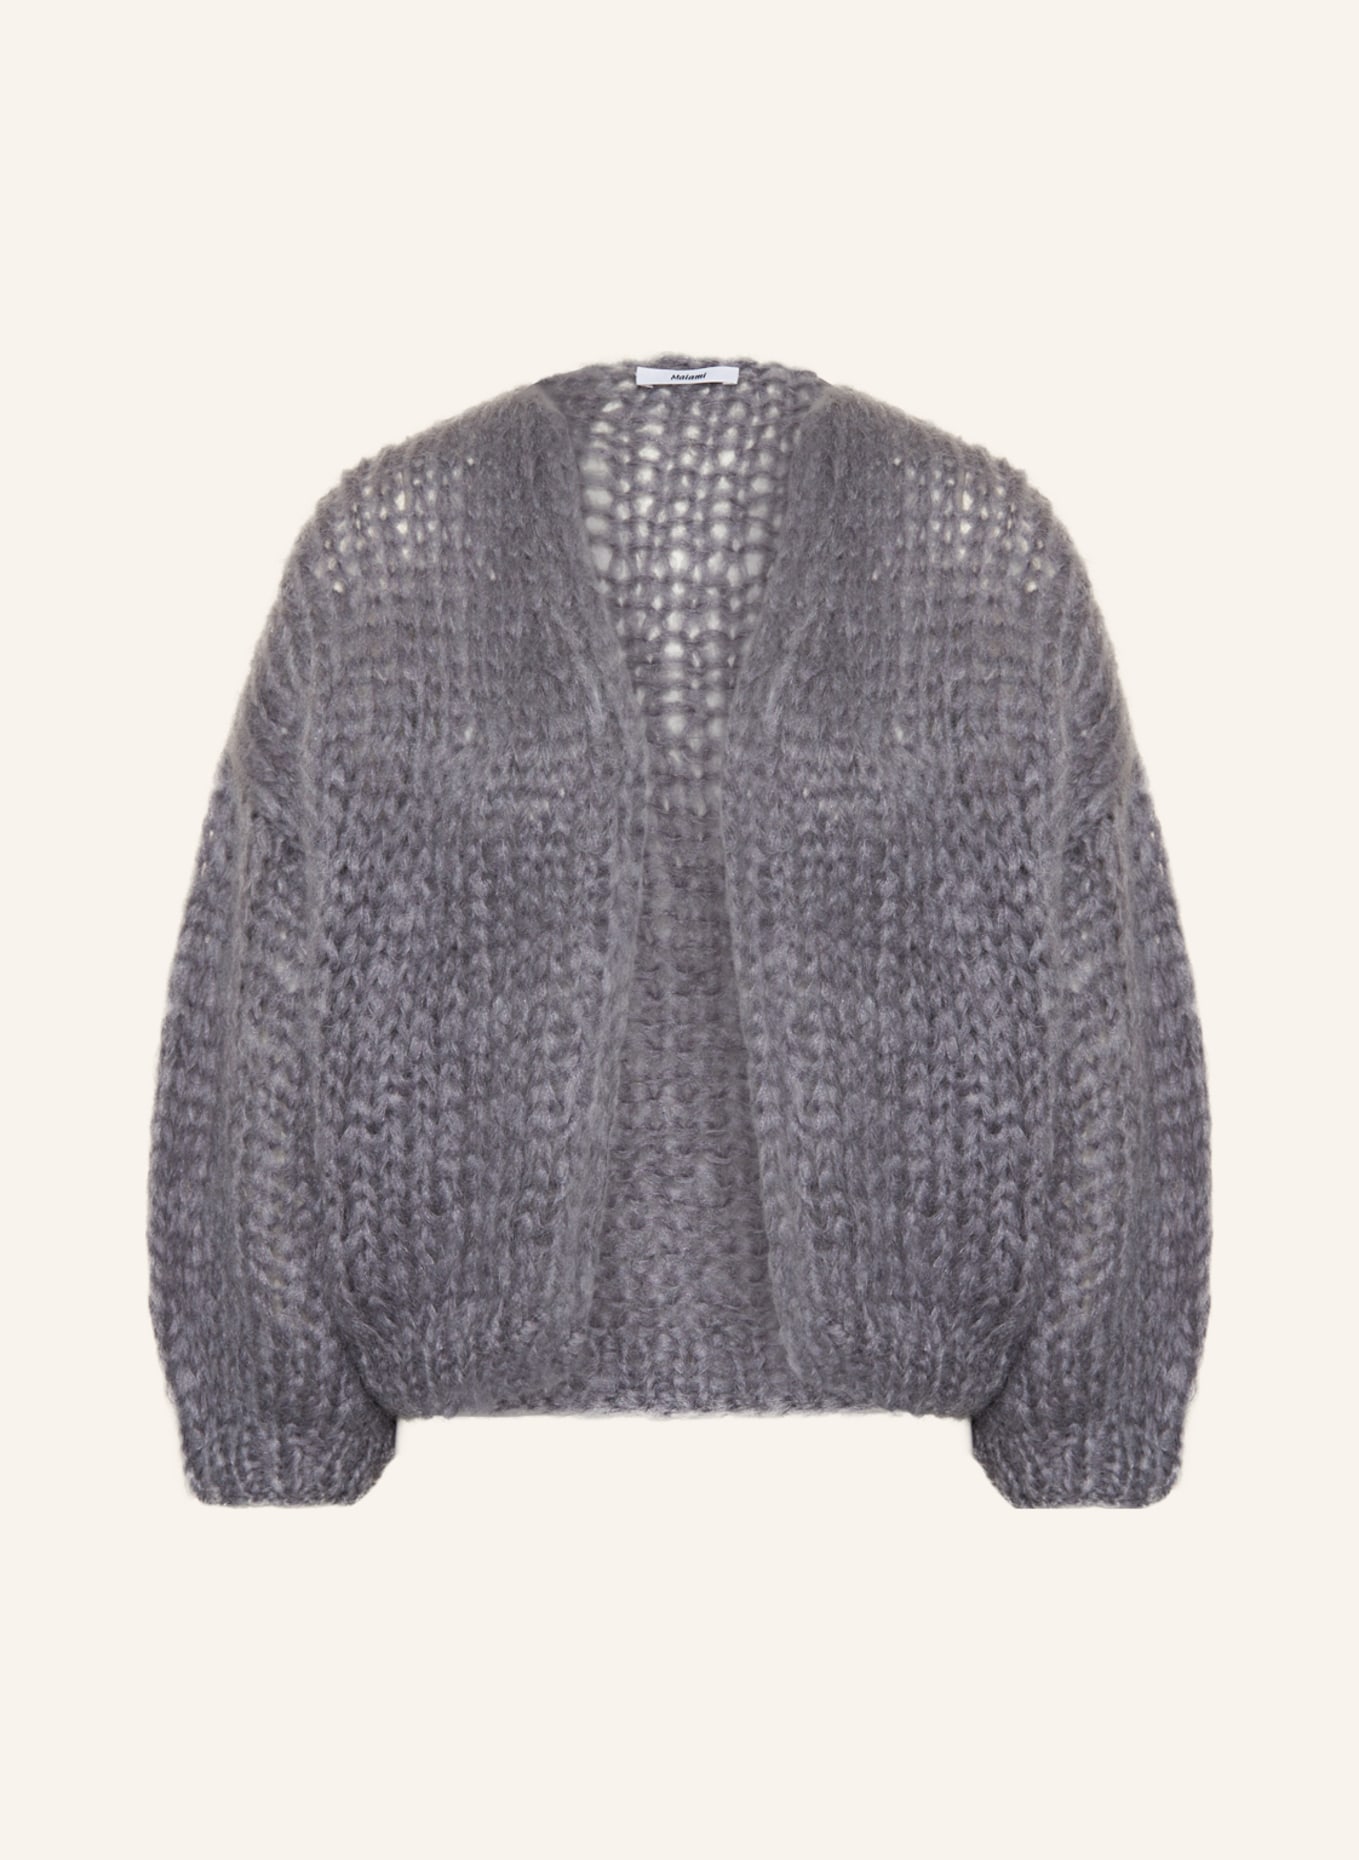 MAIAMI Oversized knit cardigan made of mohair, Color: DARK GRAY (Image 1)